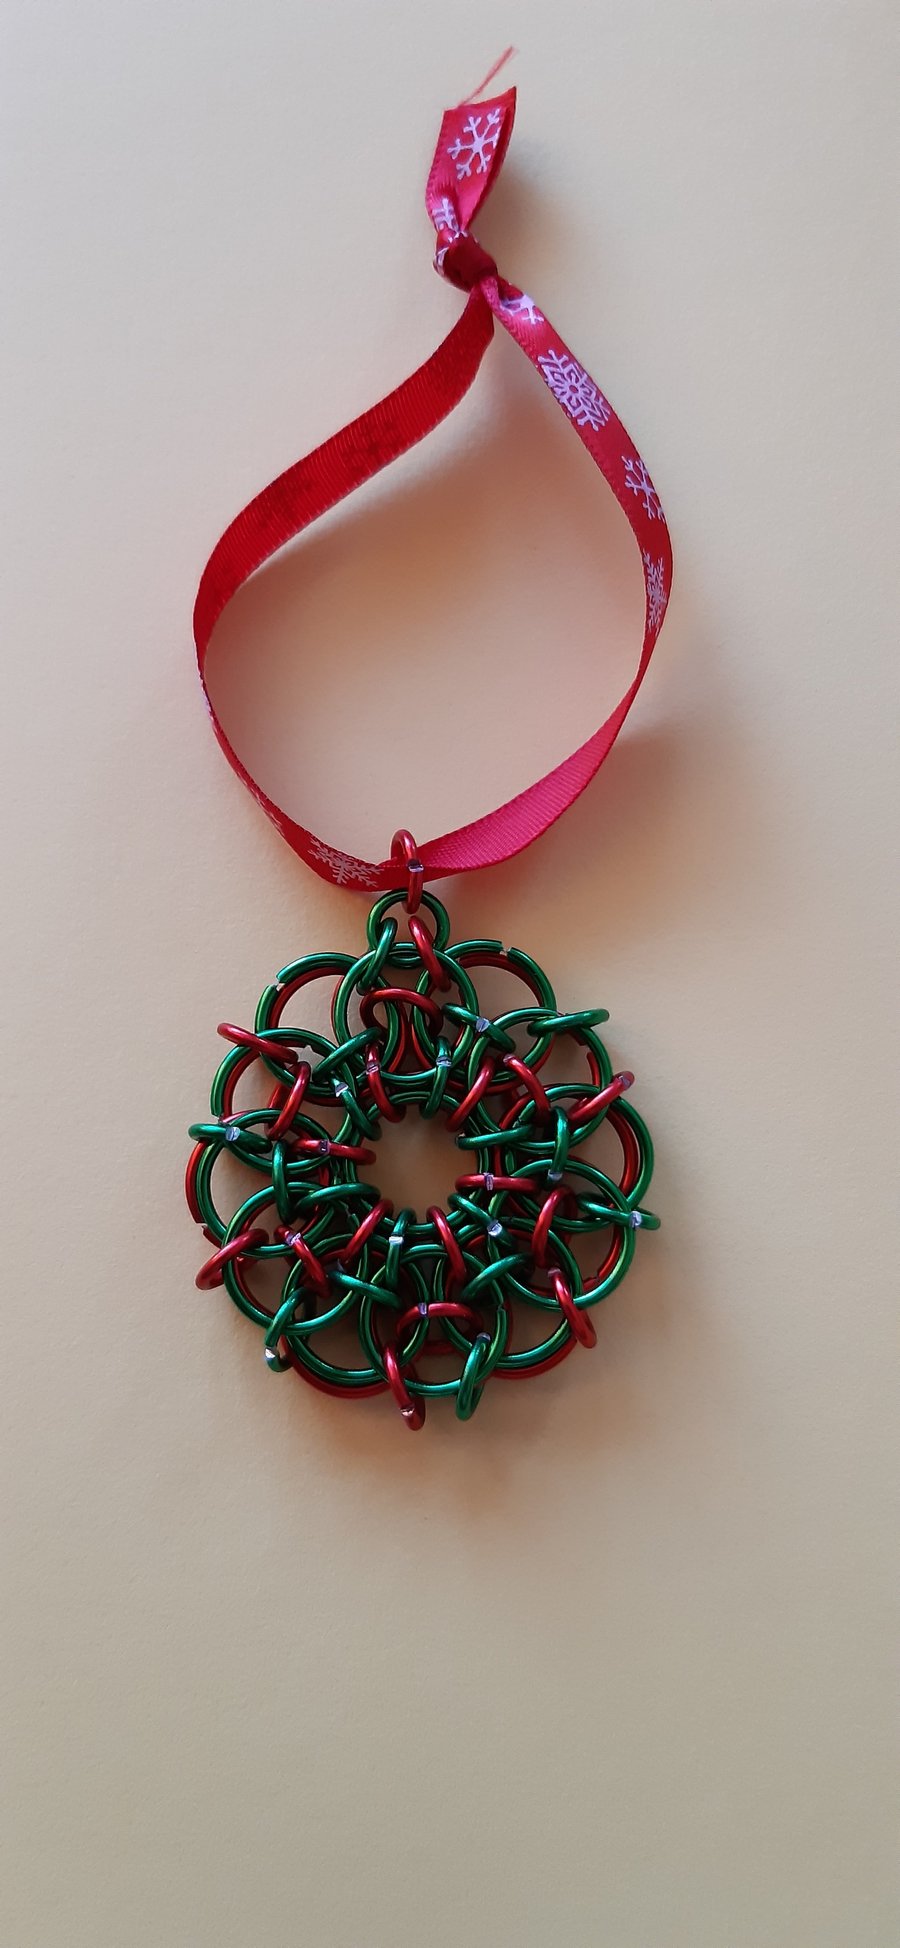 Chainmail red and green mirror Christmas decoration bauble wreath